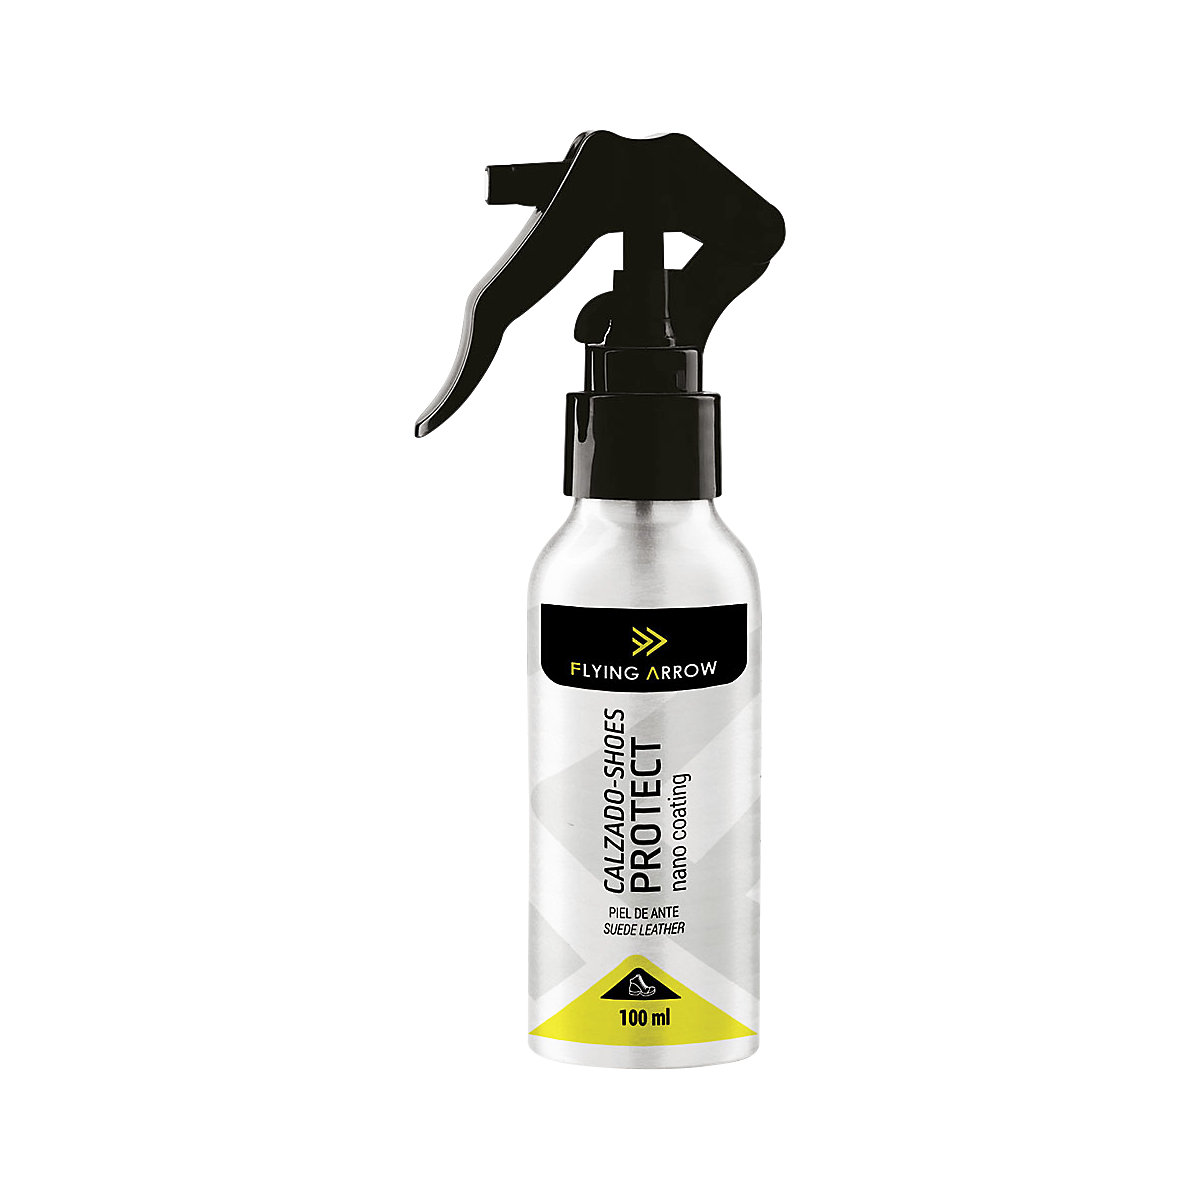 FLYING ARROW PROTECTOR shoe protection spray - DUNLOP